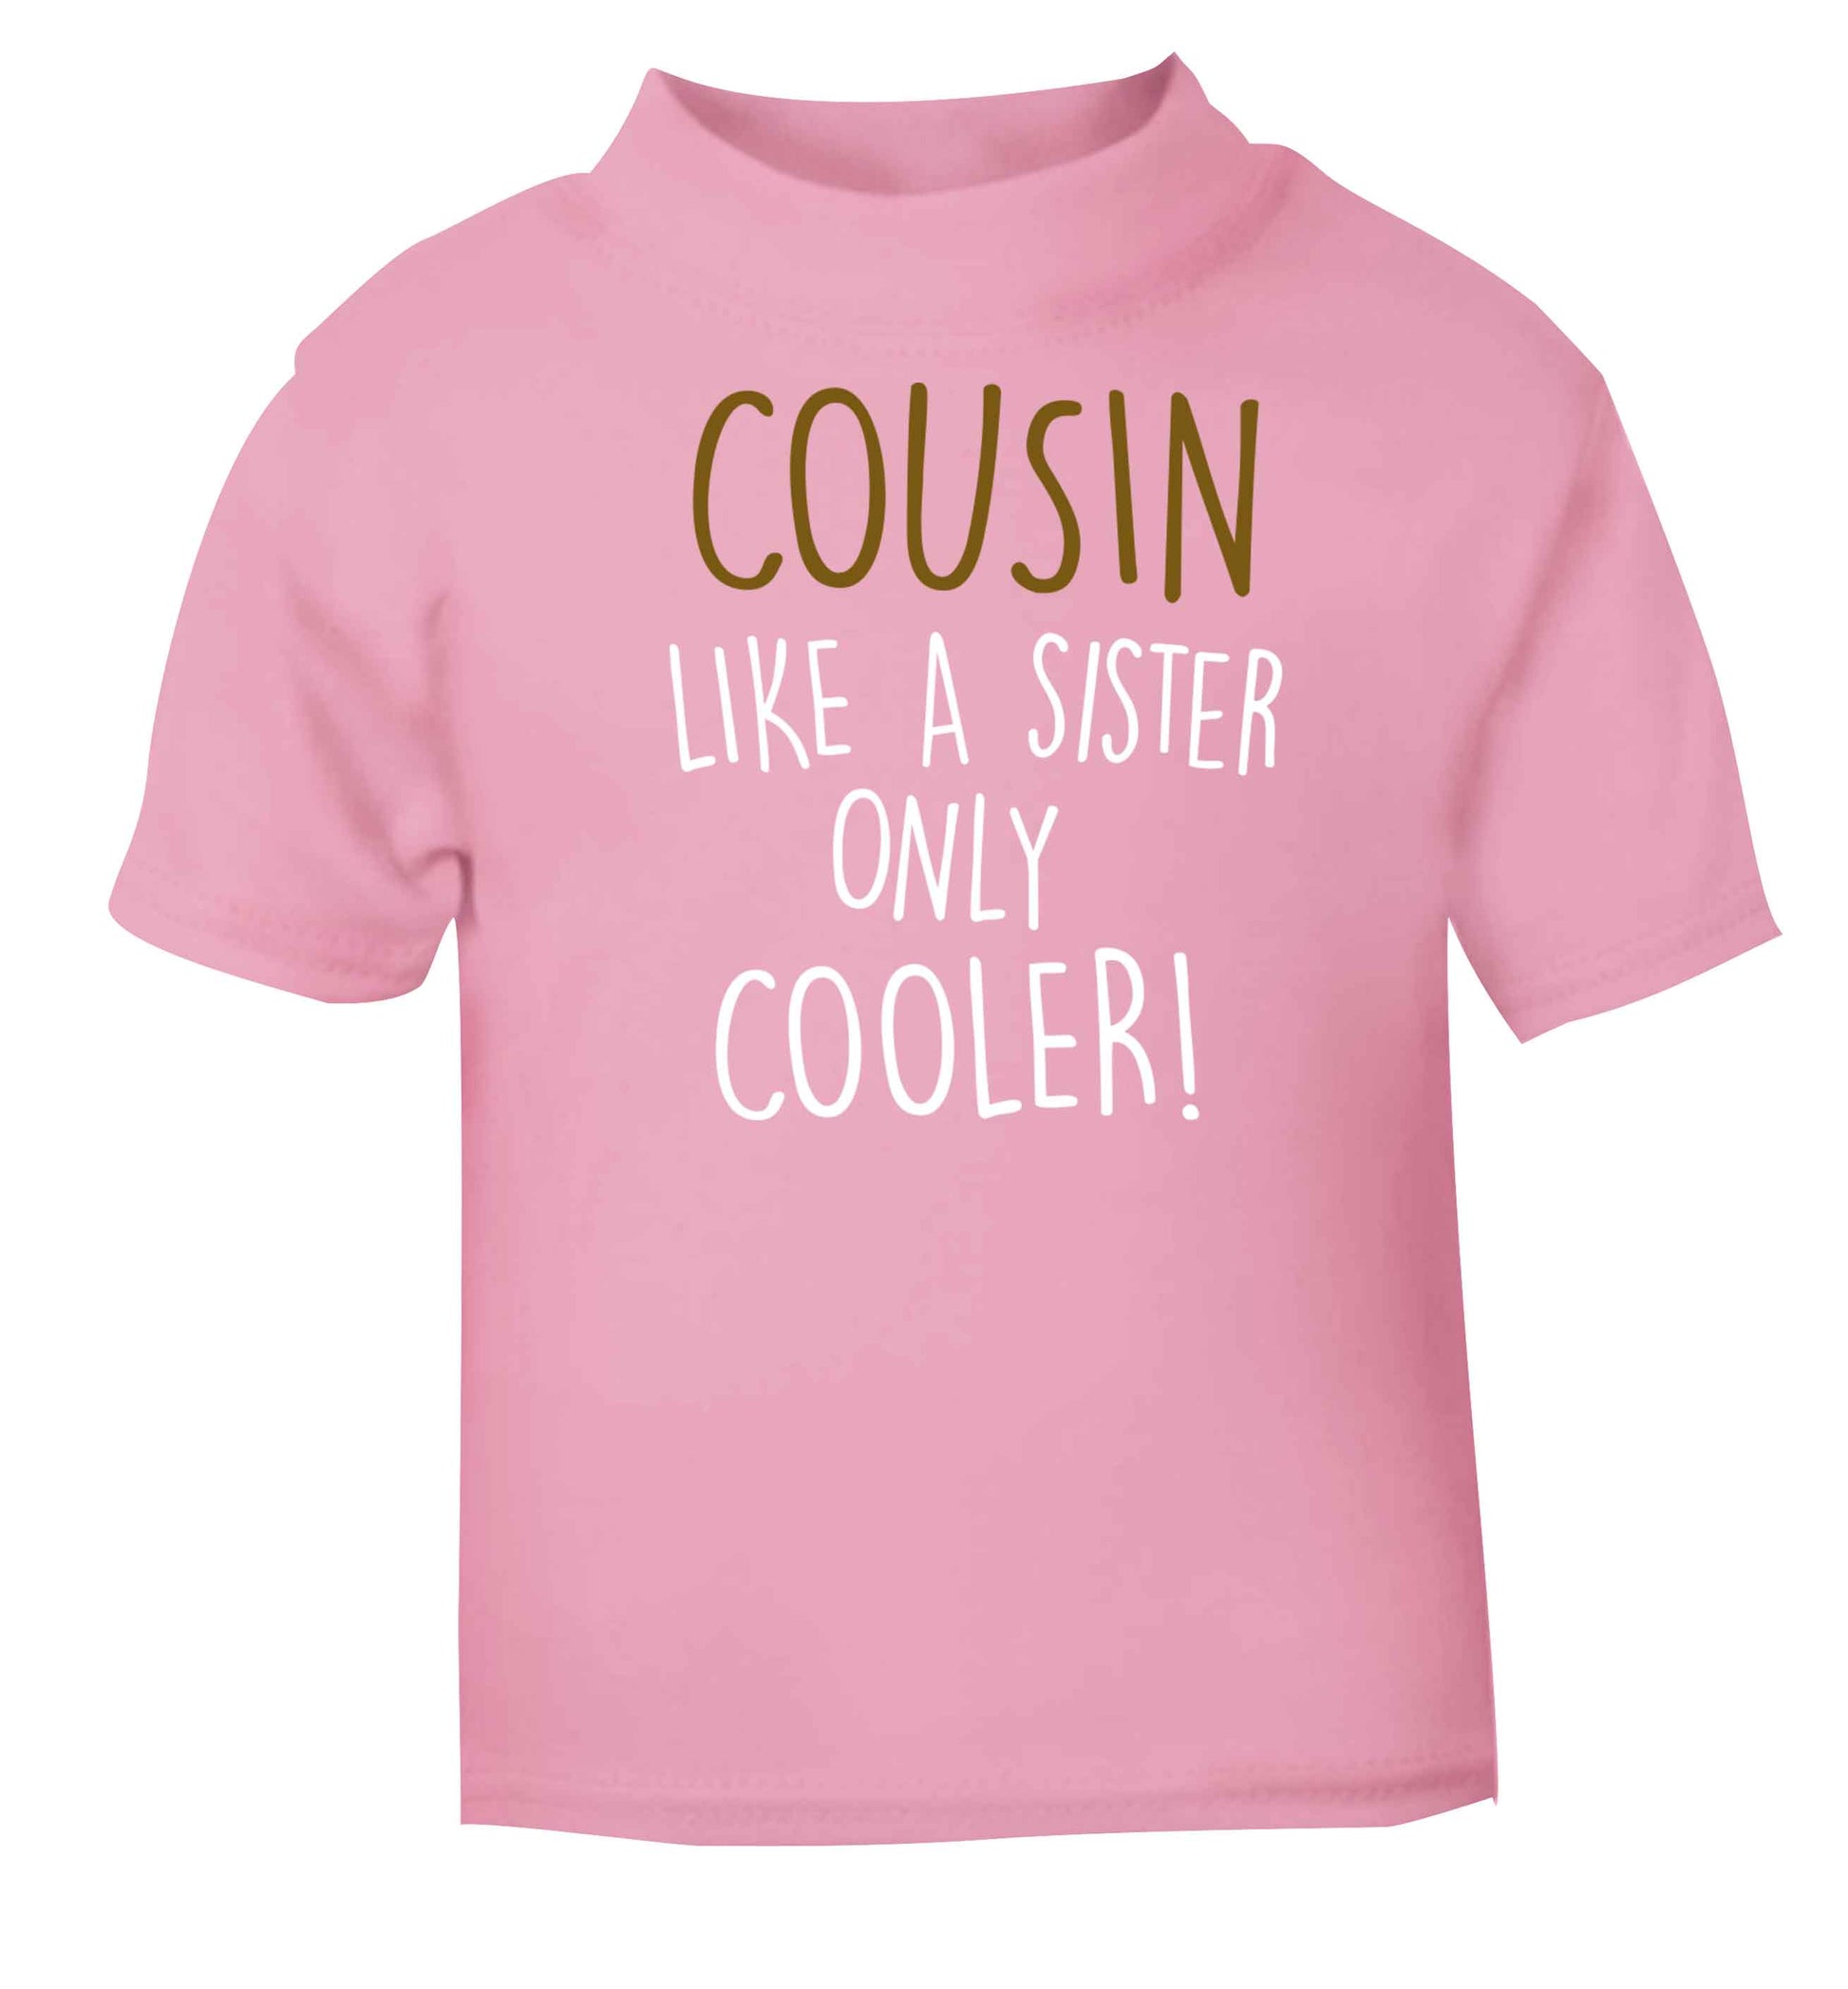 Cousin like a sister only cooler light pink baby toddler Tshirt 2 Years